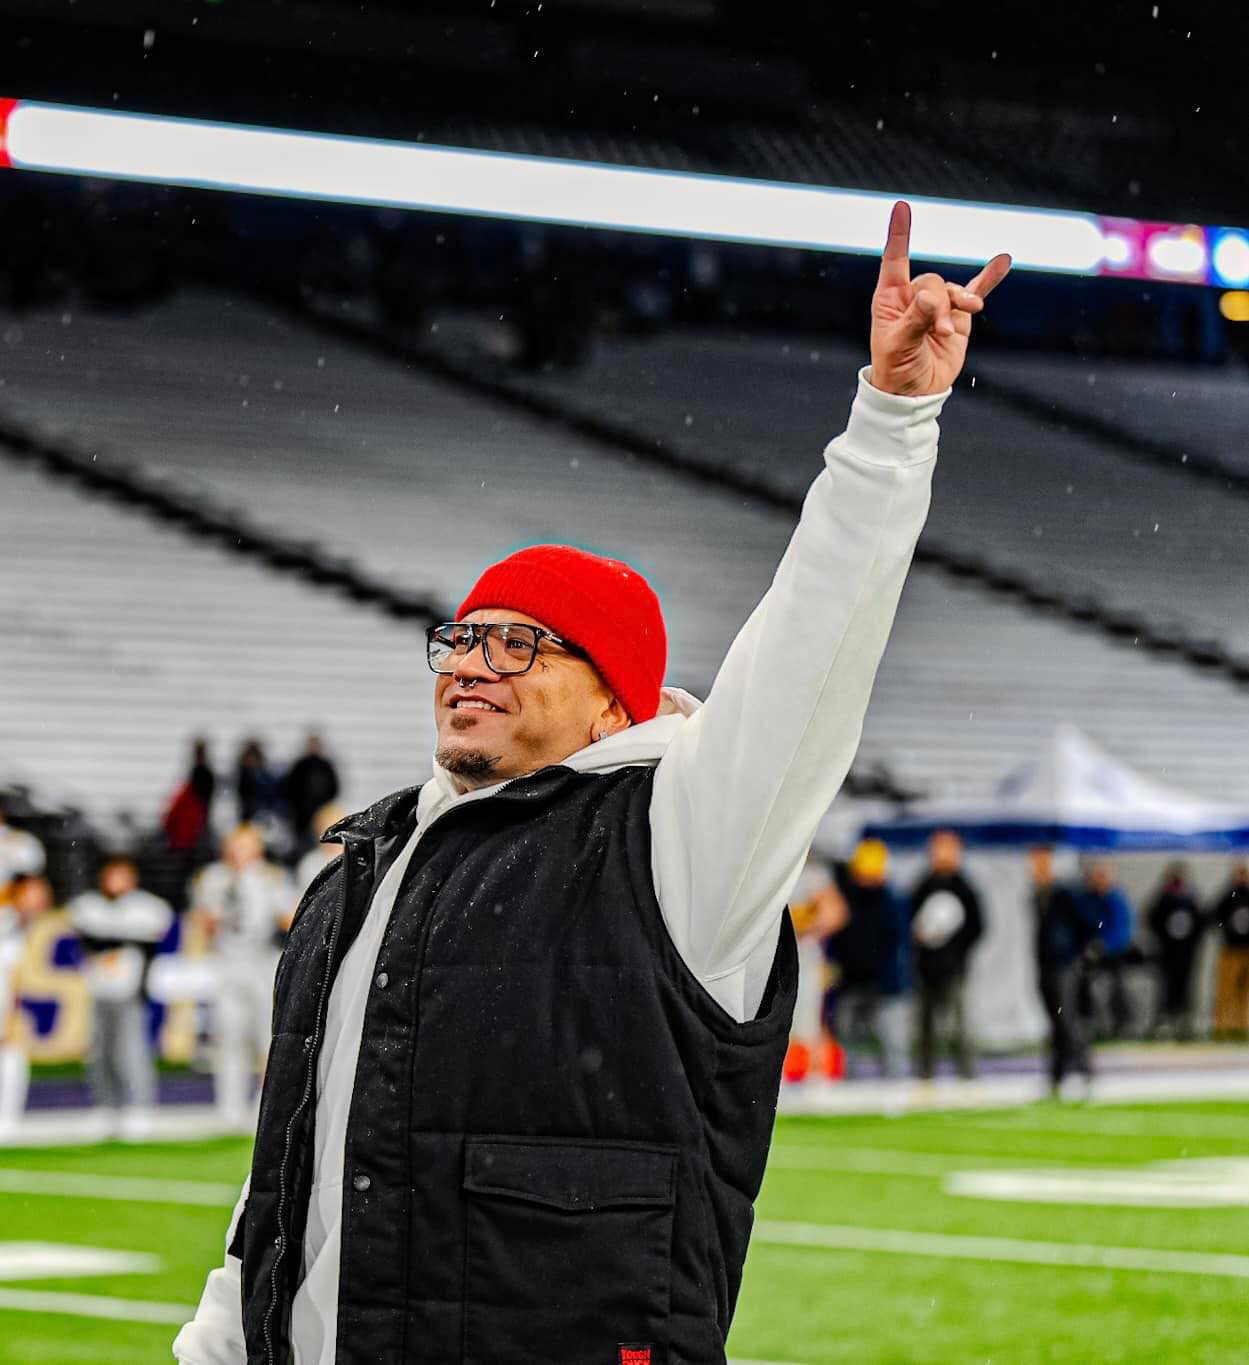 Nui Aalona, 1999 Yelm graduate, smiles after the conclusion of his rendition of the national anthem at the 3A football championship game, Friday, Dec. 1 at Husky Stadium.